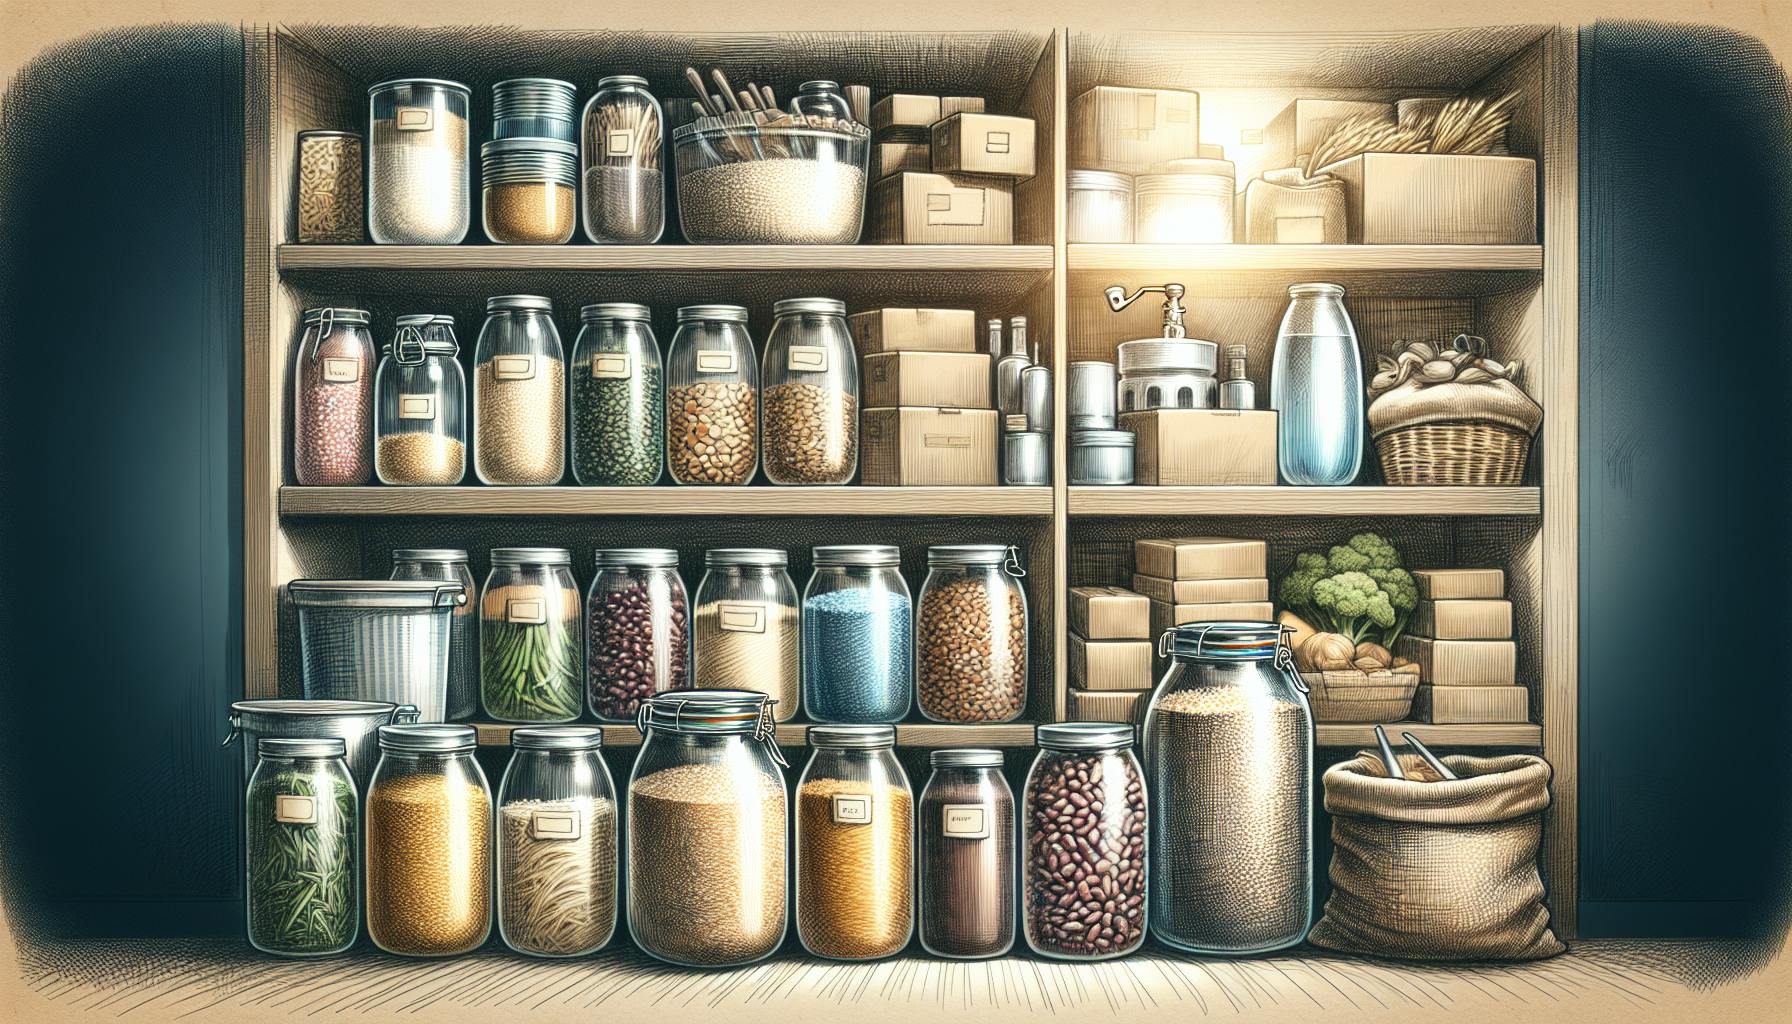 Best Survival Foods to Stock Up On: Pantry Essentials